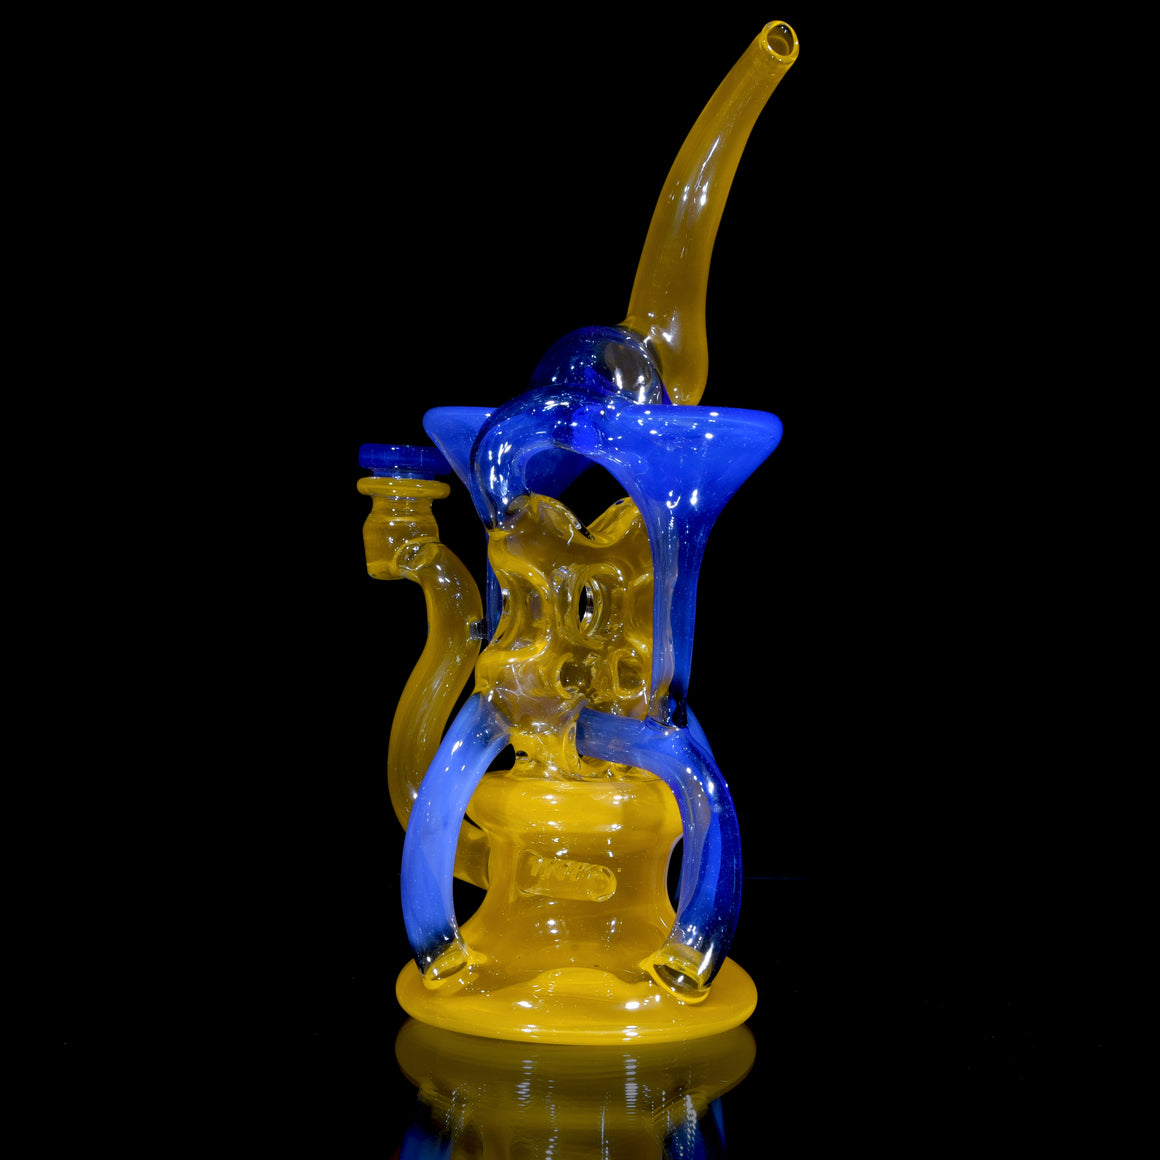 Tombstone Swiss Double-Cycler - Mystique/Rasta Gold - 10mm Female